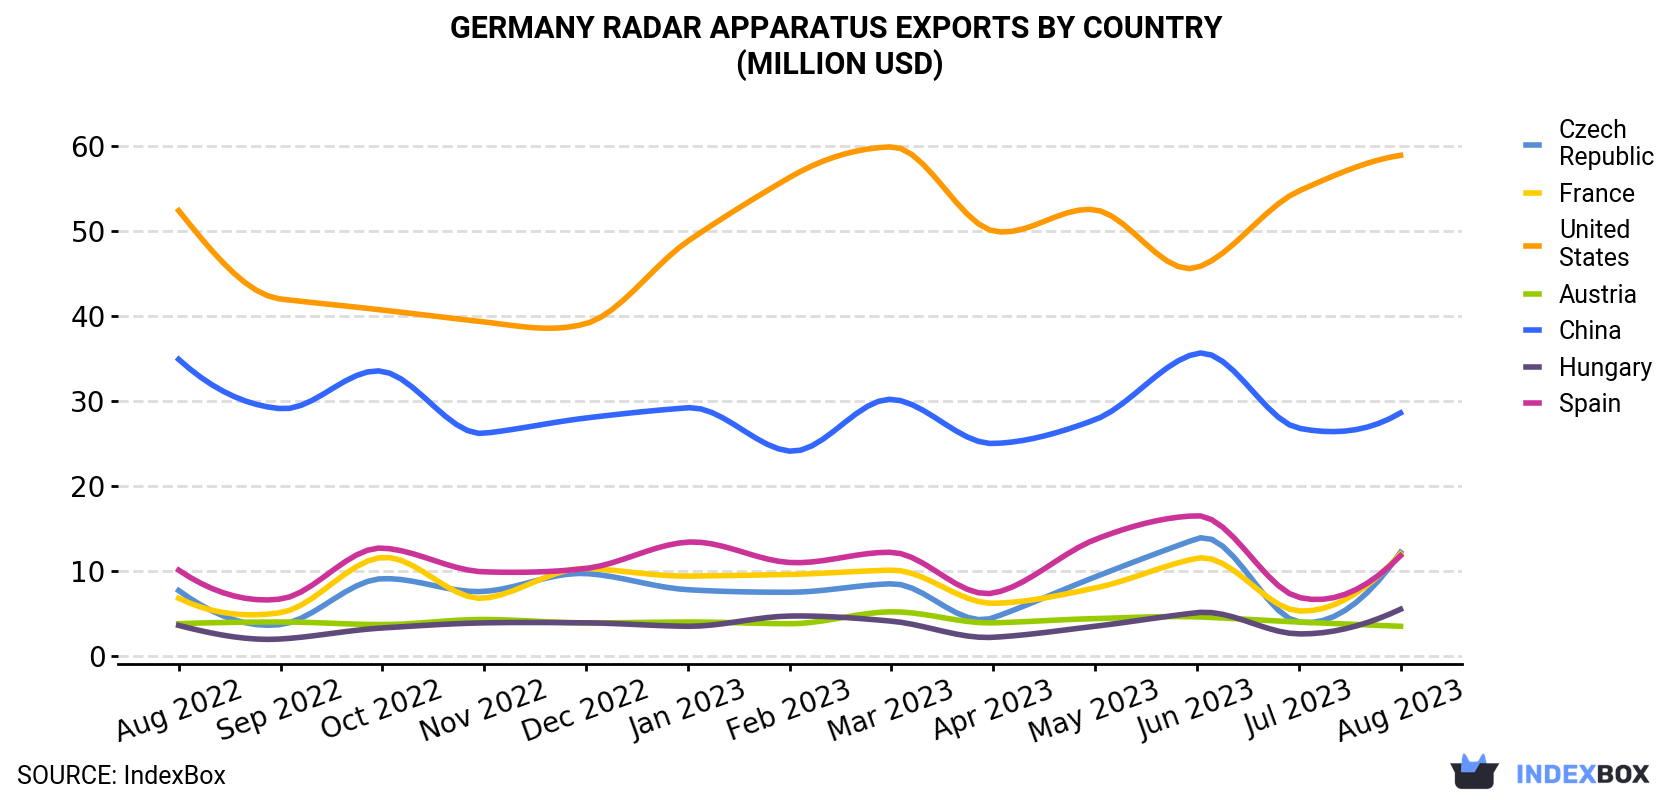 Germany Radar Apparatus Exports By Country (Million USD)